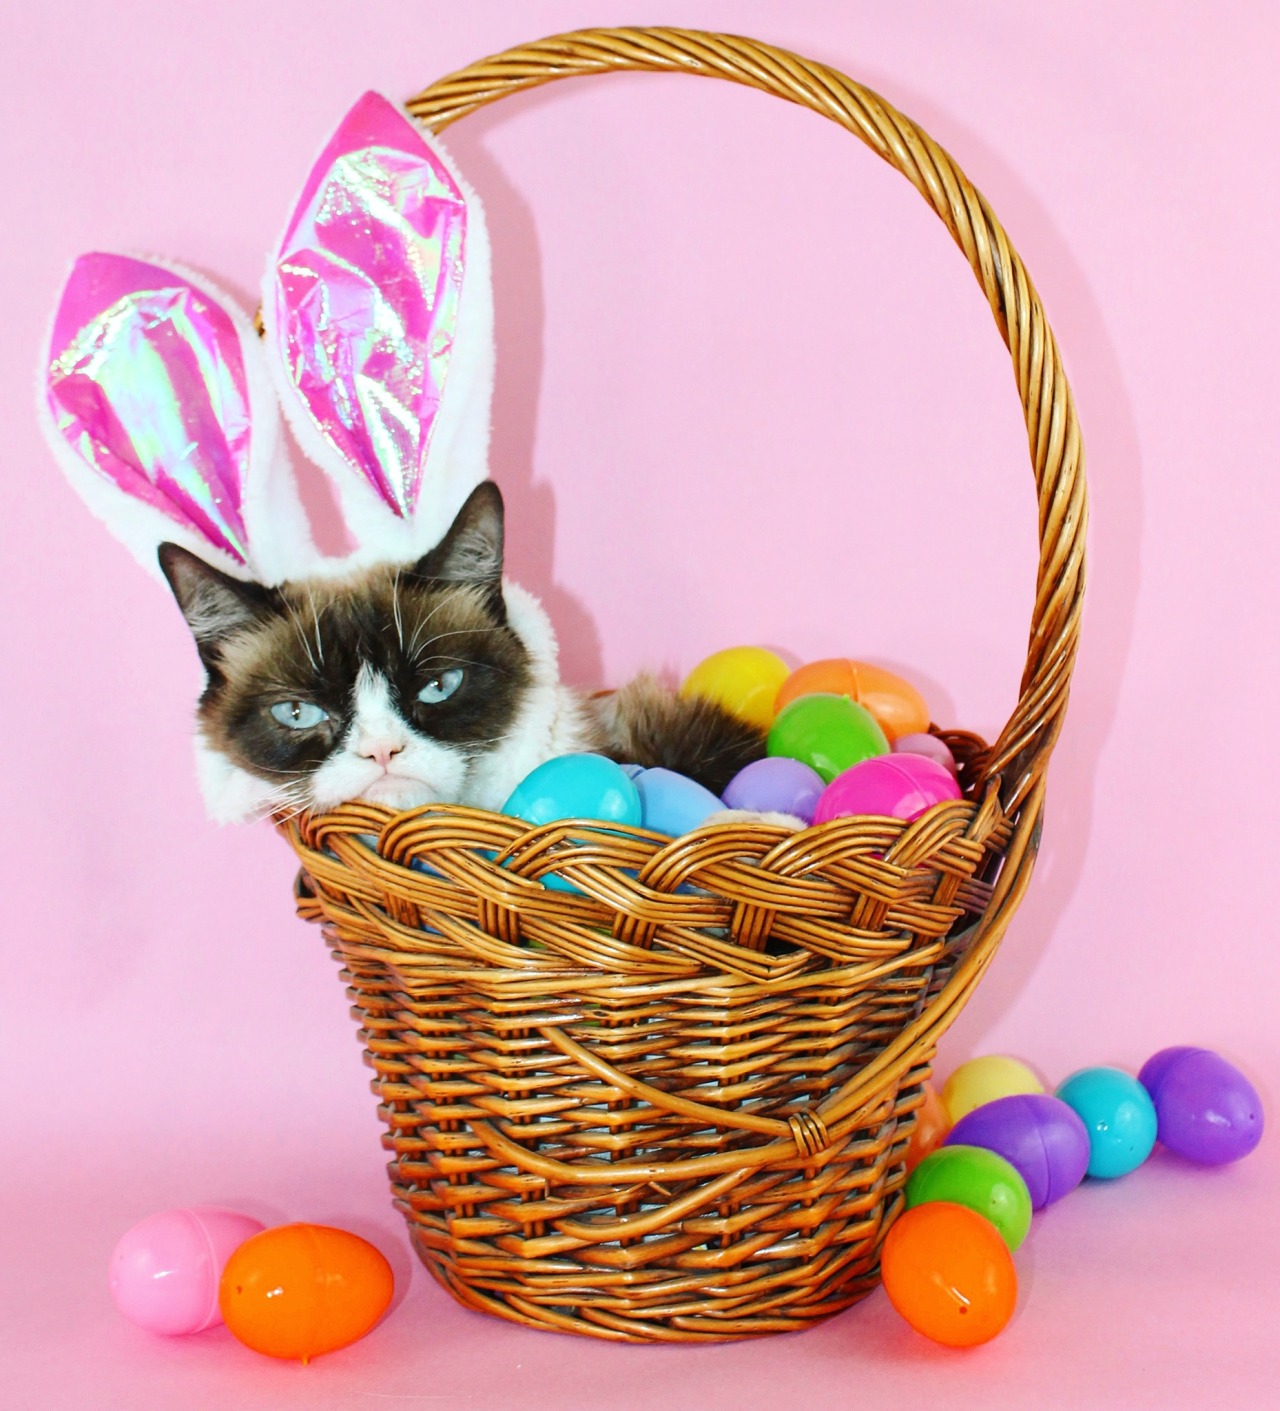 Have an awful Easter. 🐣😾🐇